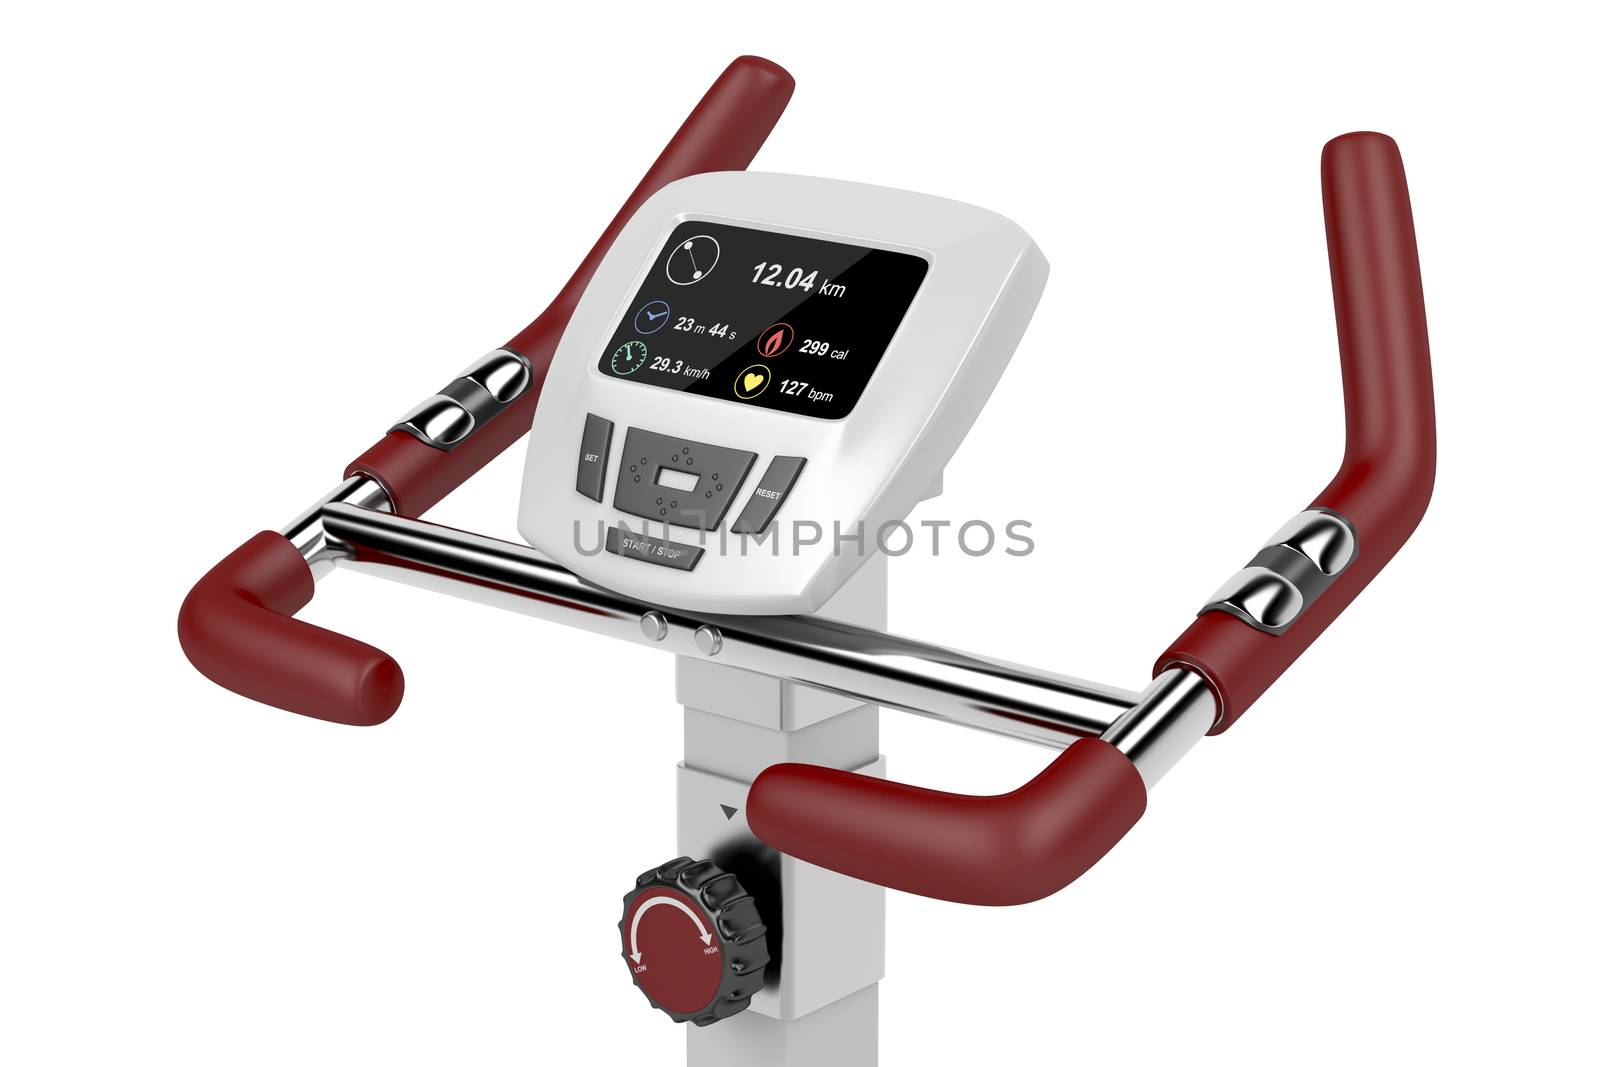 Exercise bike by magraphics